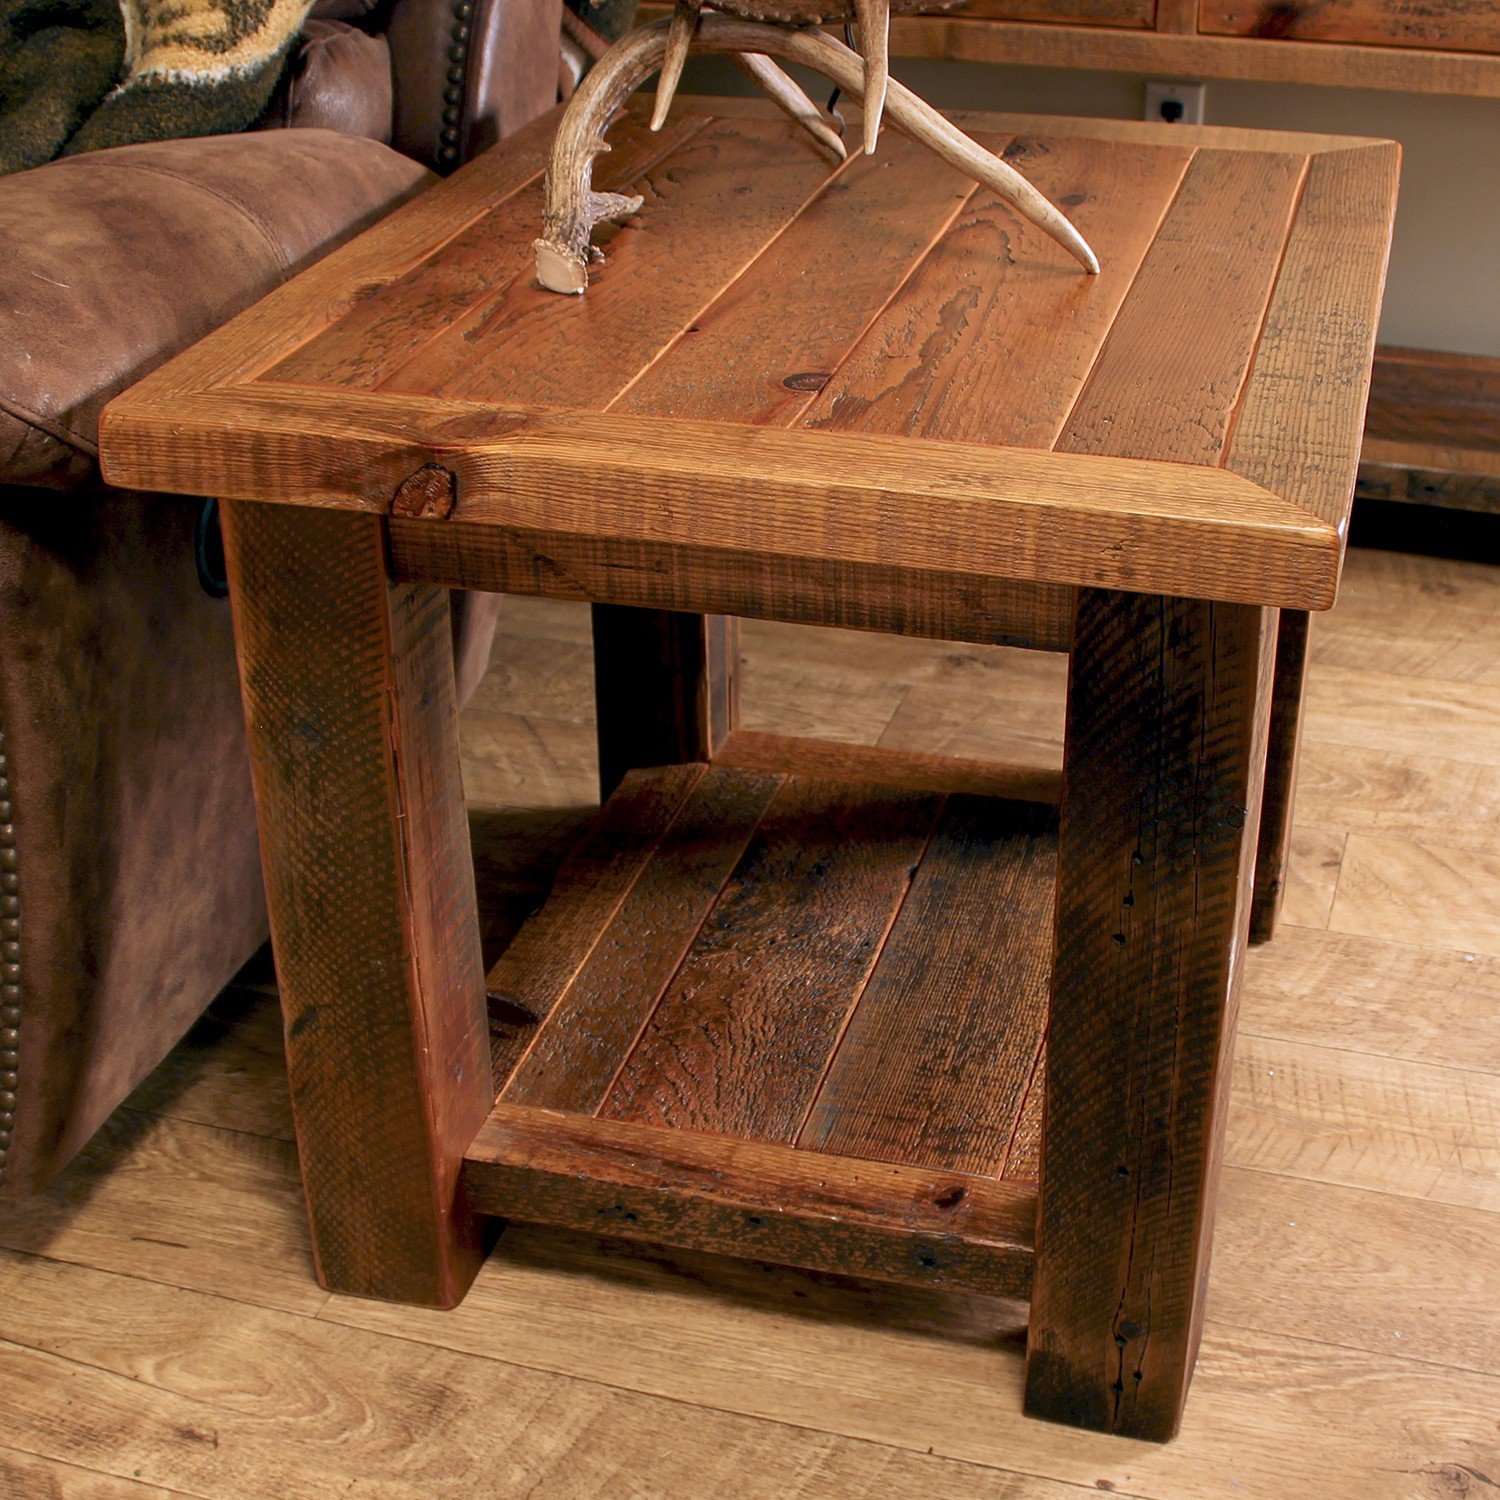 rustic western and country end tables log img corner accent table old sawmill timber frame modern dark wood coffee barn door console battery lamp wooden home decor student desk